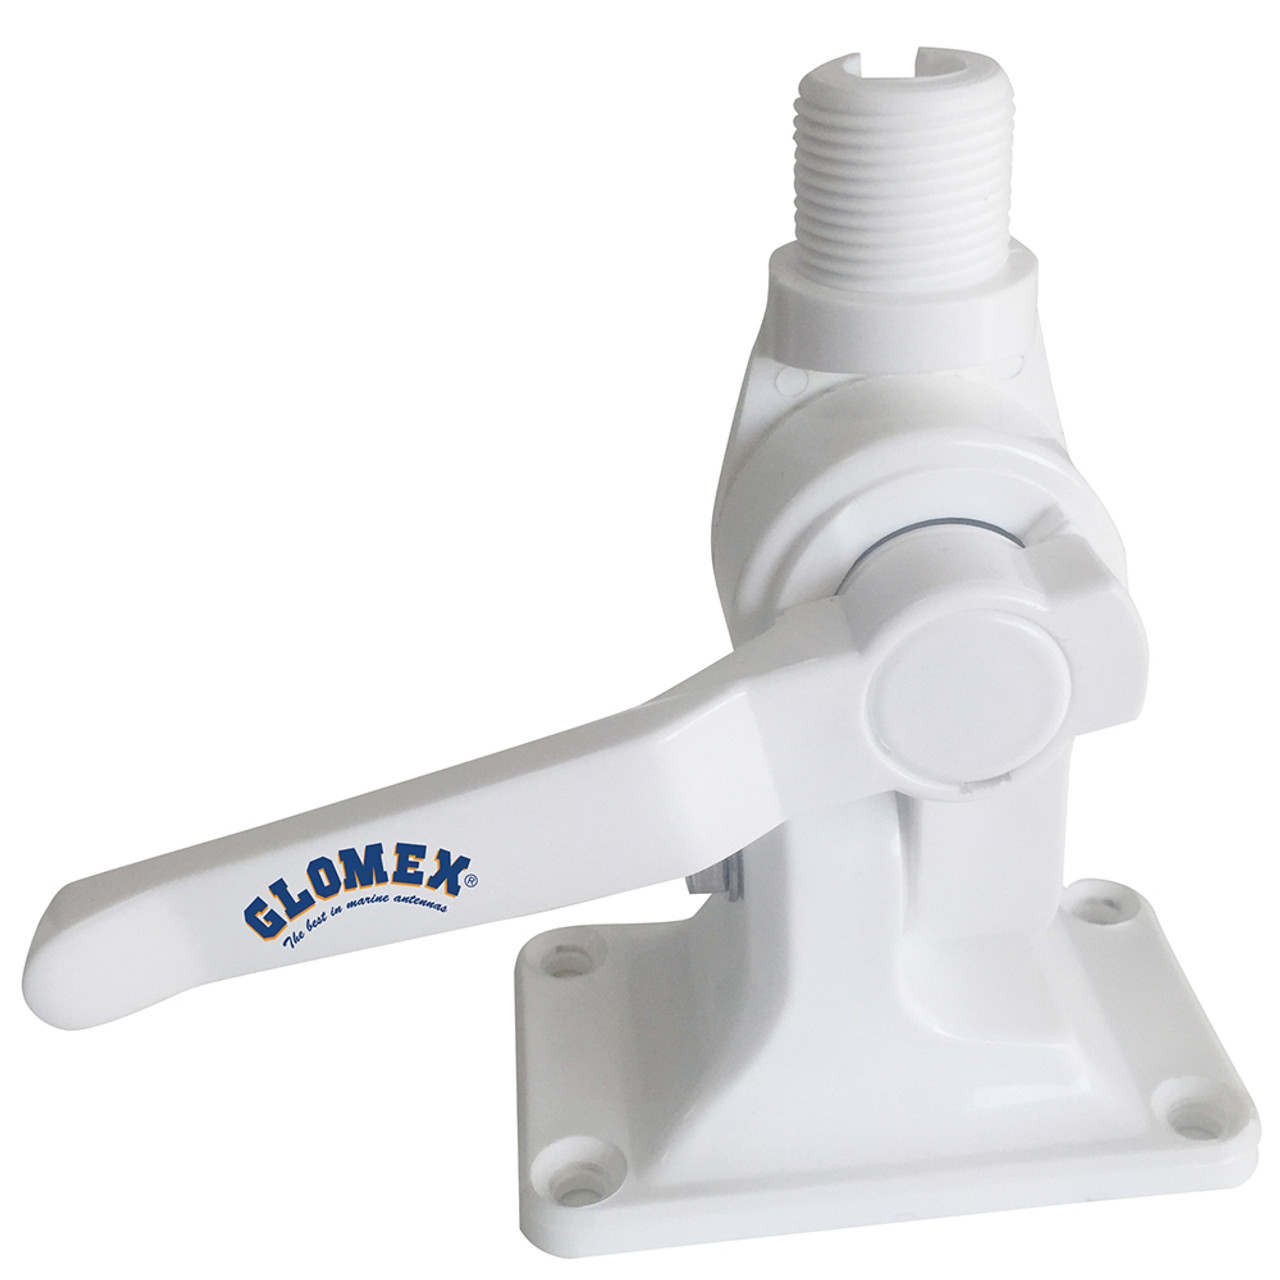 Glomex 4-Way Nylon Heavy-Duty Ratchet Mount w\/Cable Slot  Built-In Coax Cable Feed-Thru 1"-14 Thread [RA115]